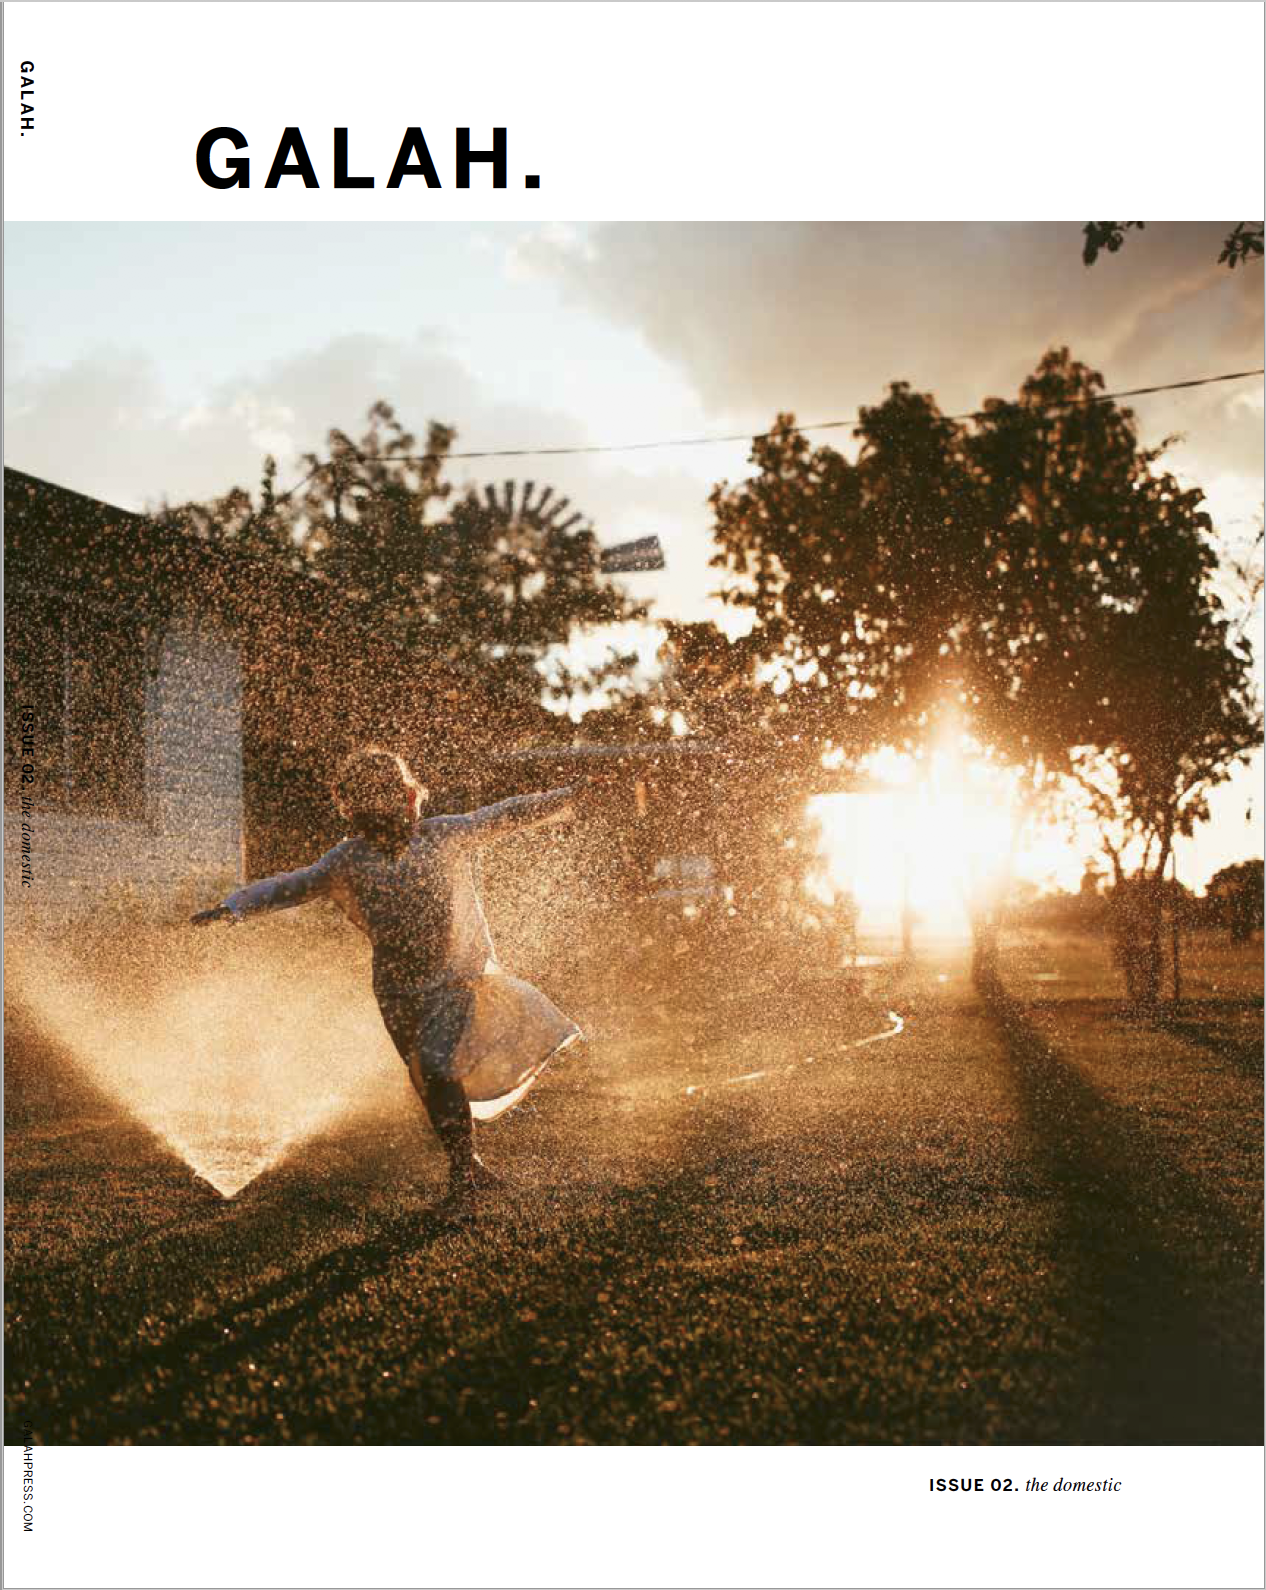 galah-magazine-issue-2.png